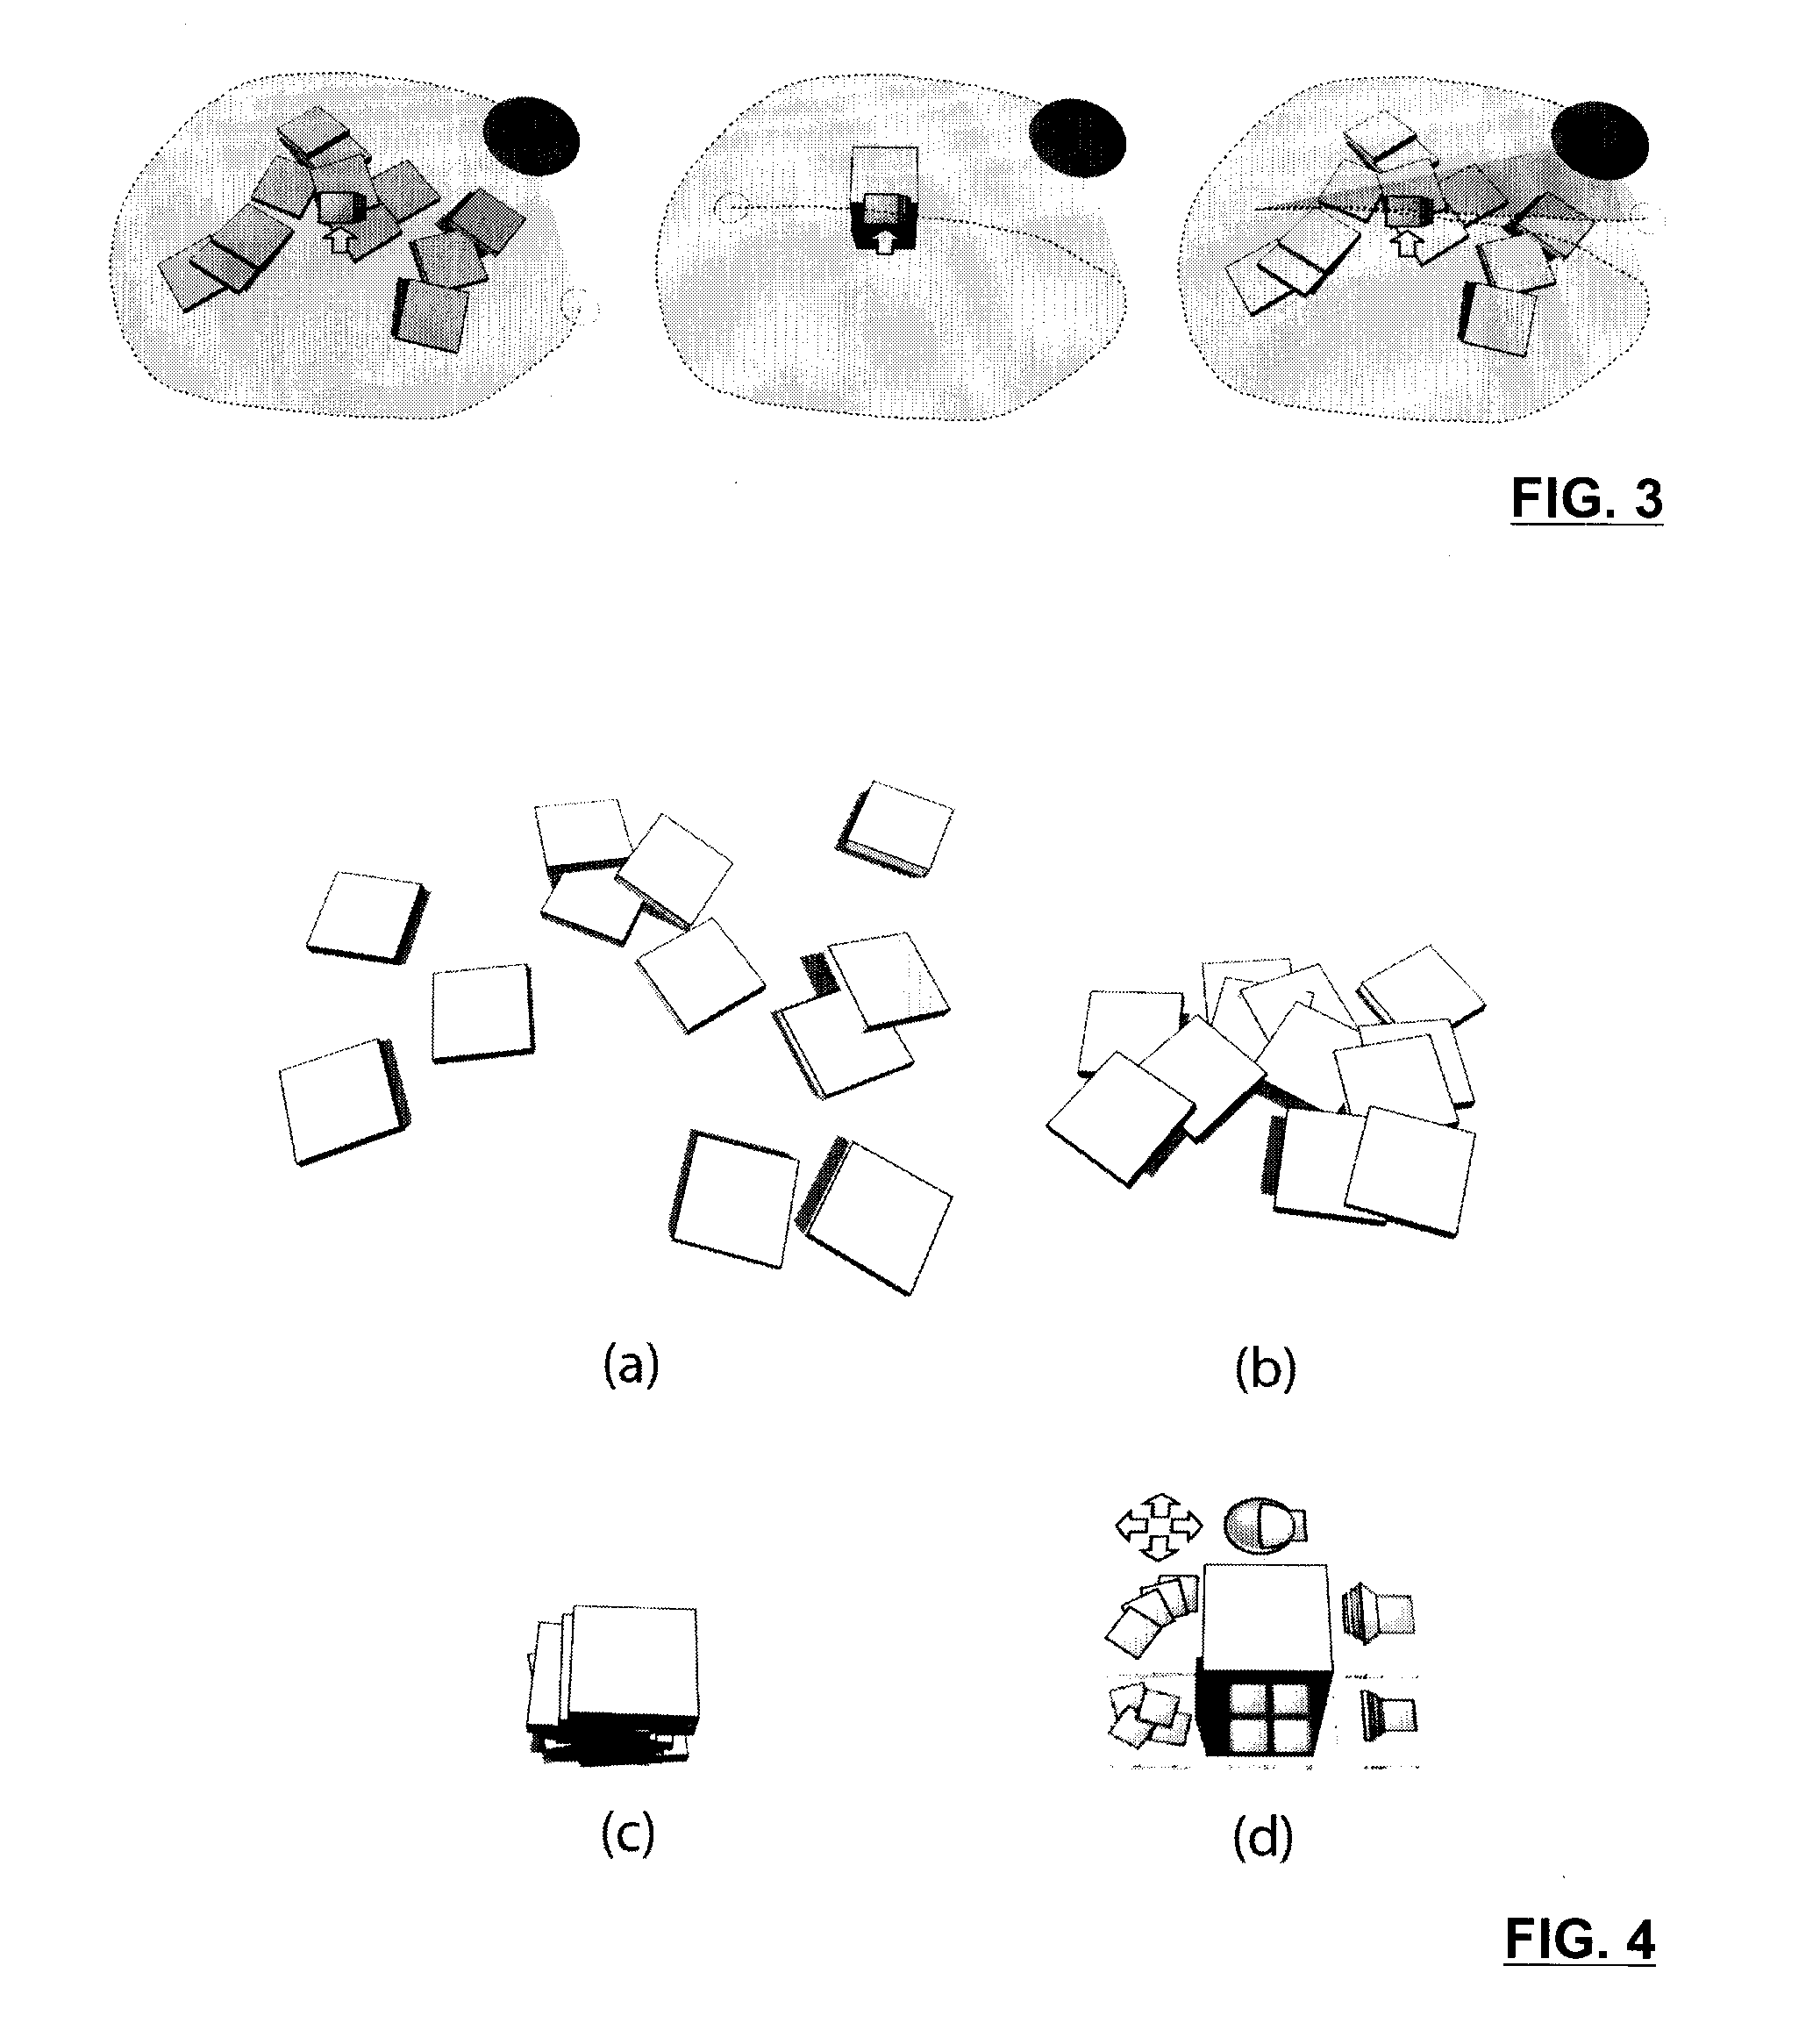 System for organizing and visualizing display objects